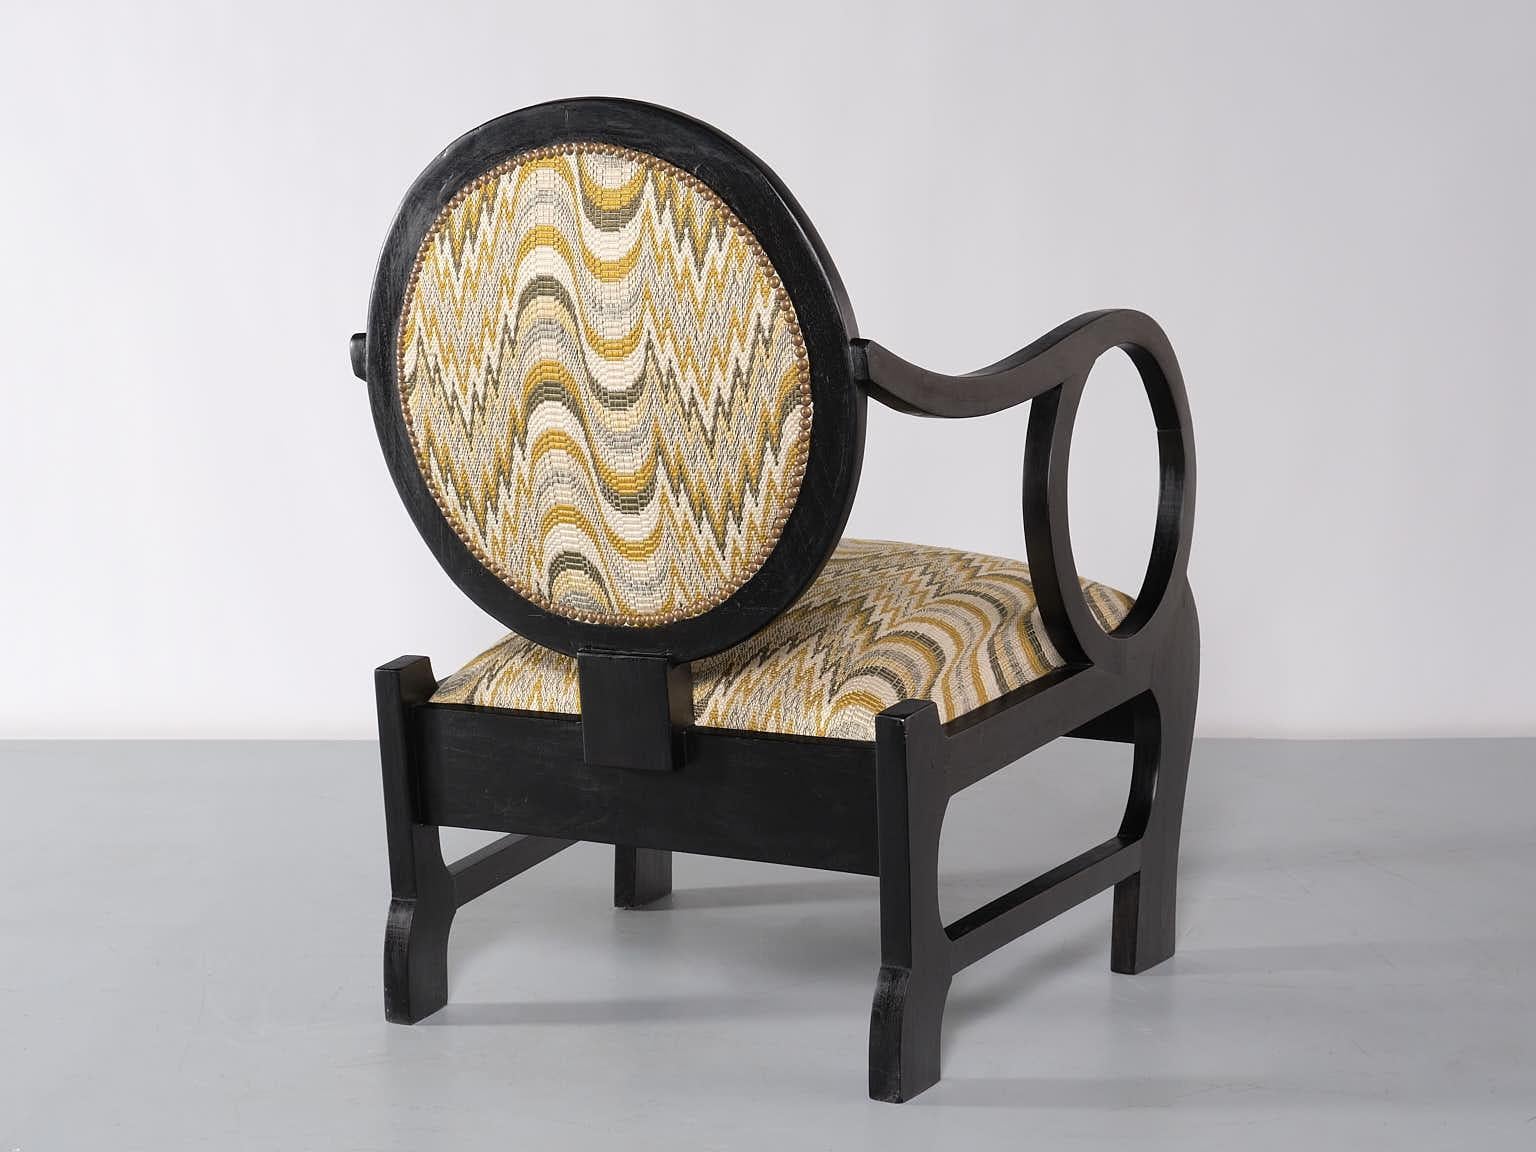 Pair of Lajos Kozma Attributed Armchairs in Oak and Dedar Jacquard, Late 1940s For Sale 4